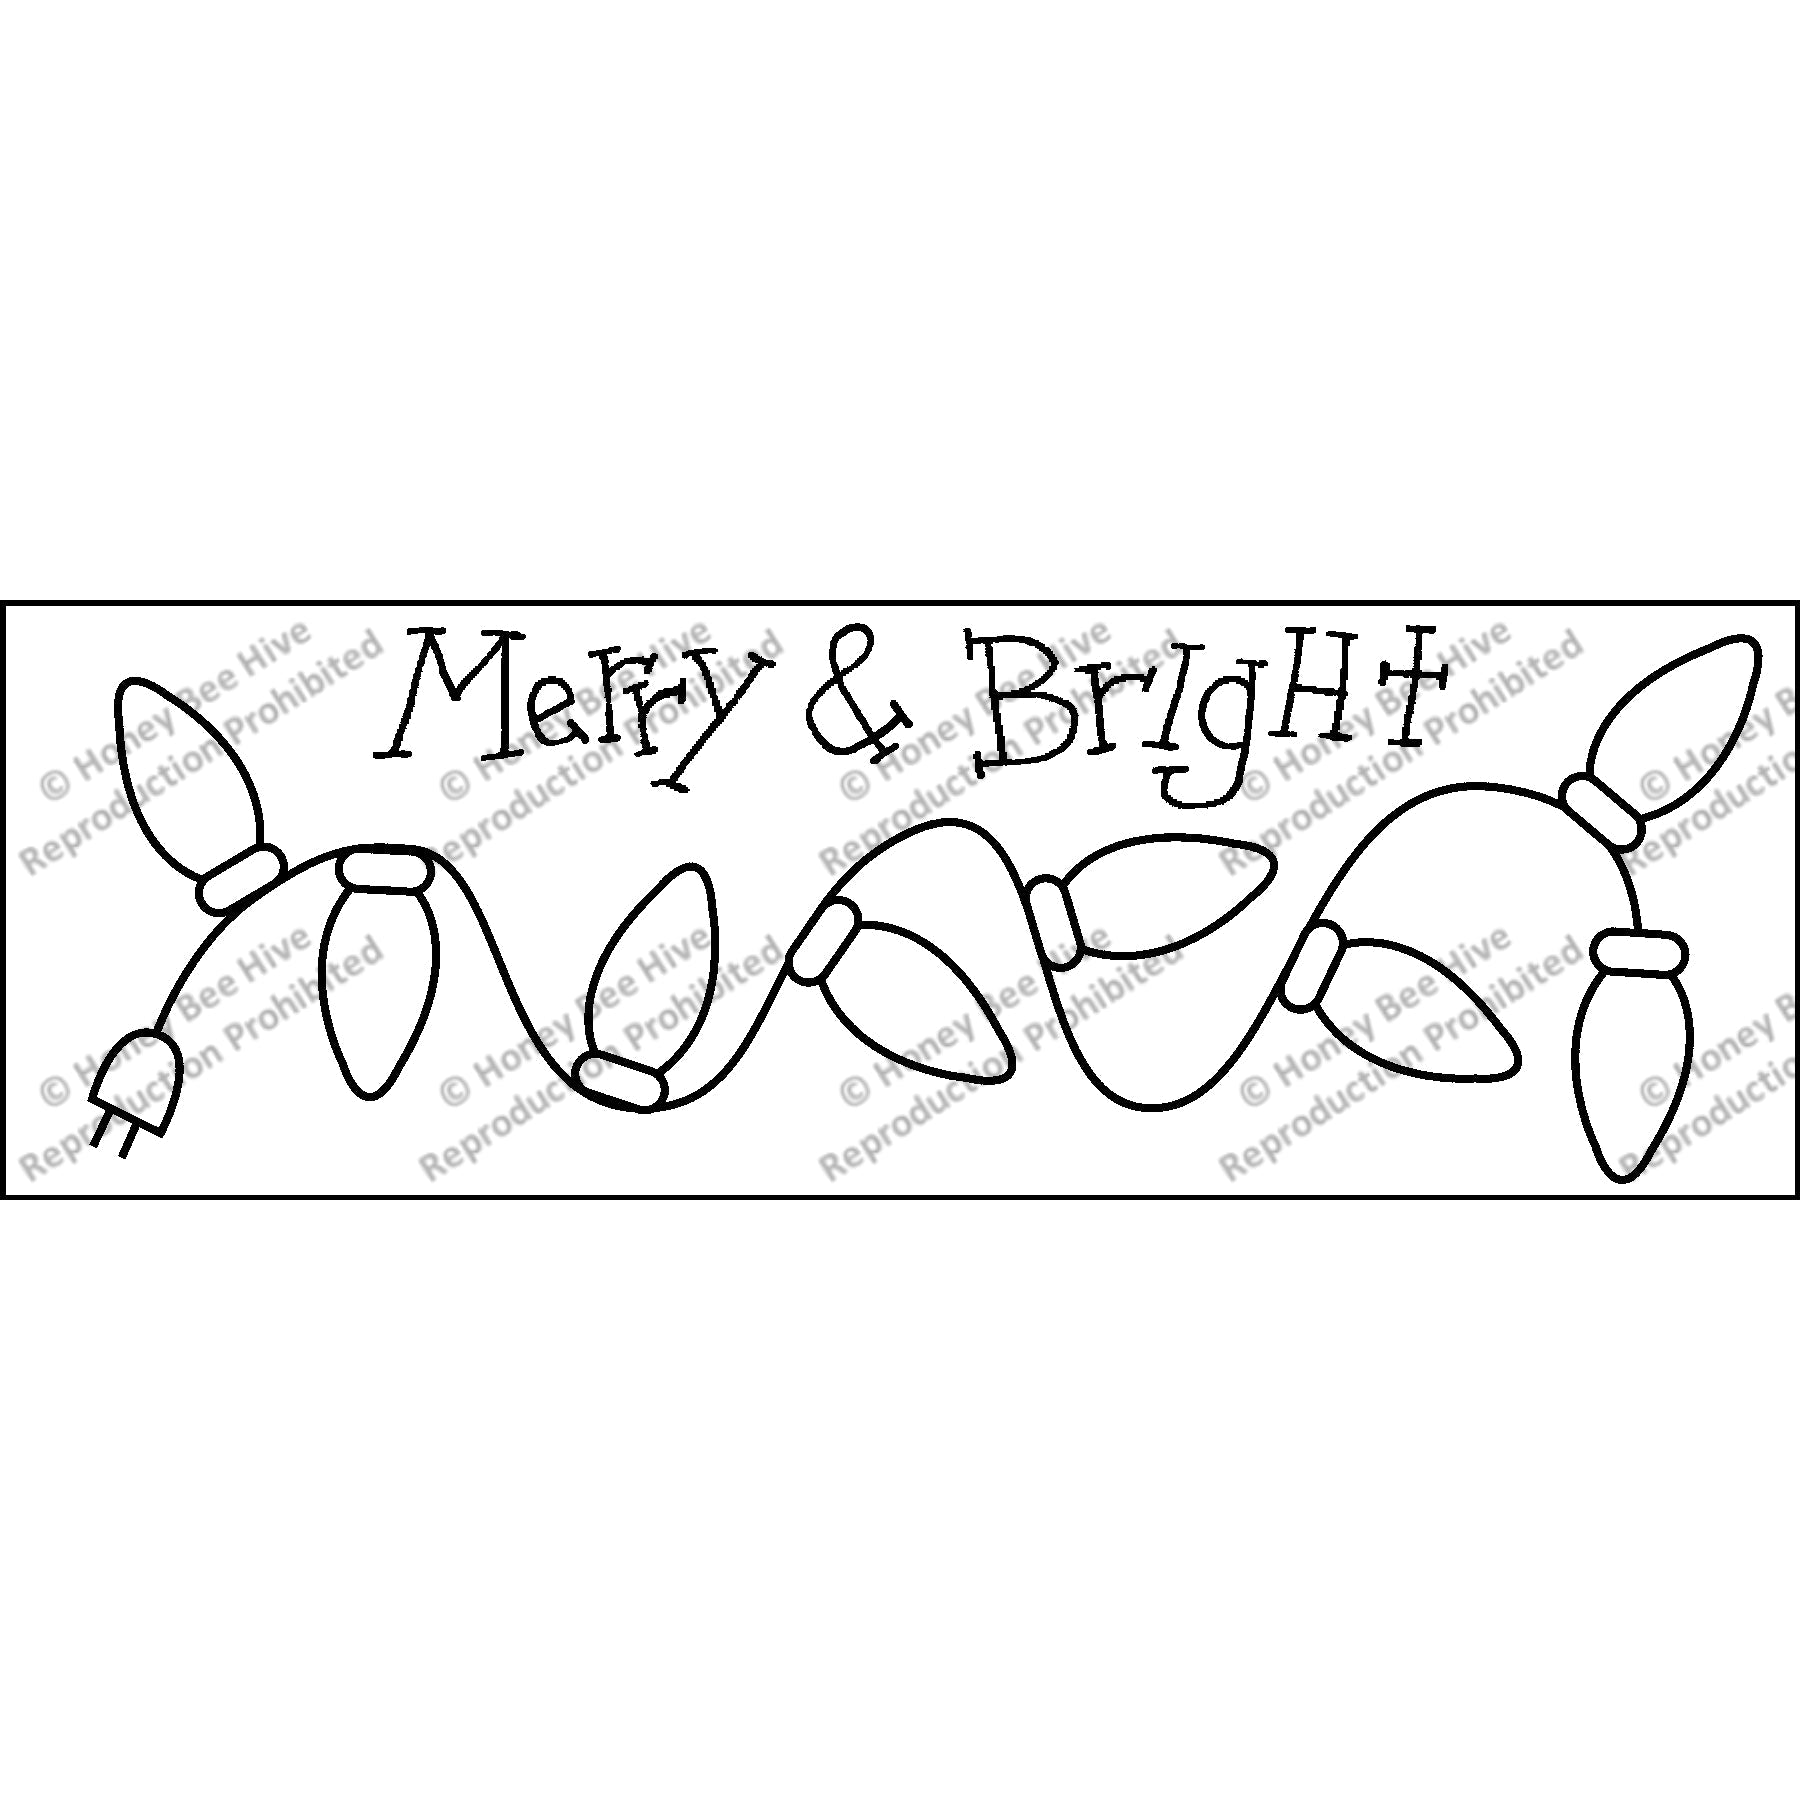 Merry and Bright, rug hooking pattern